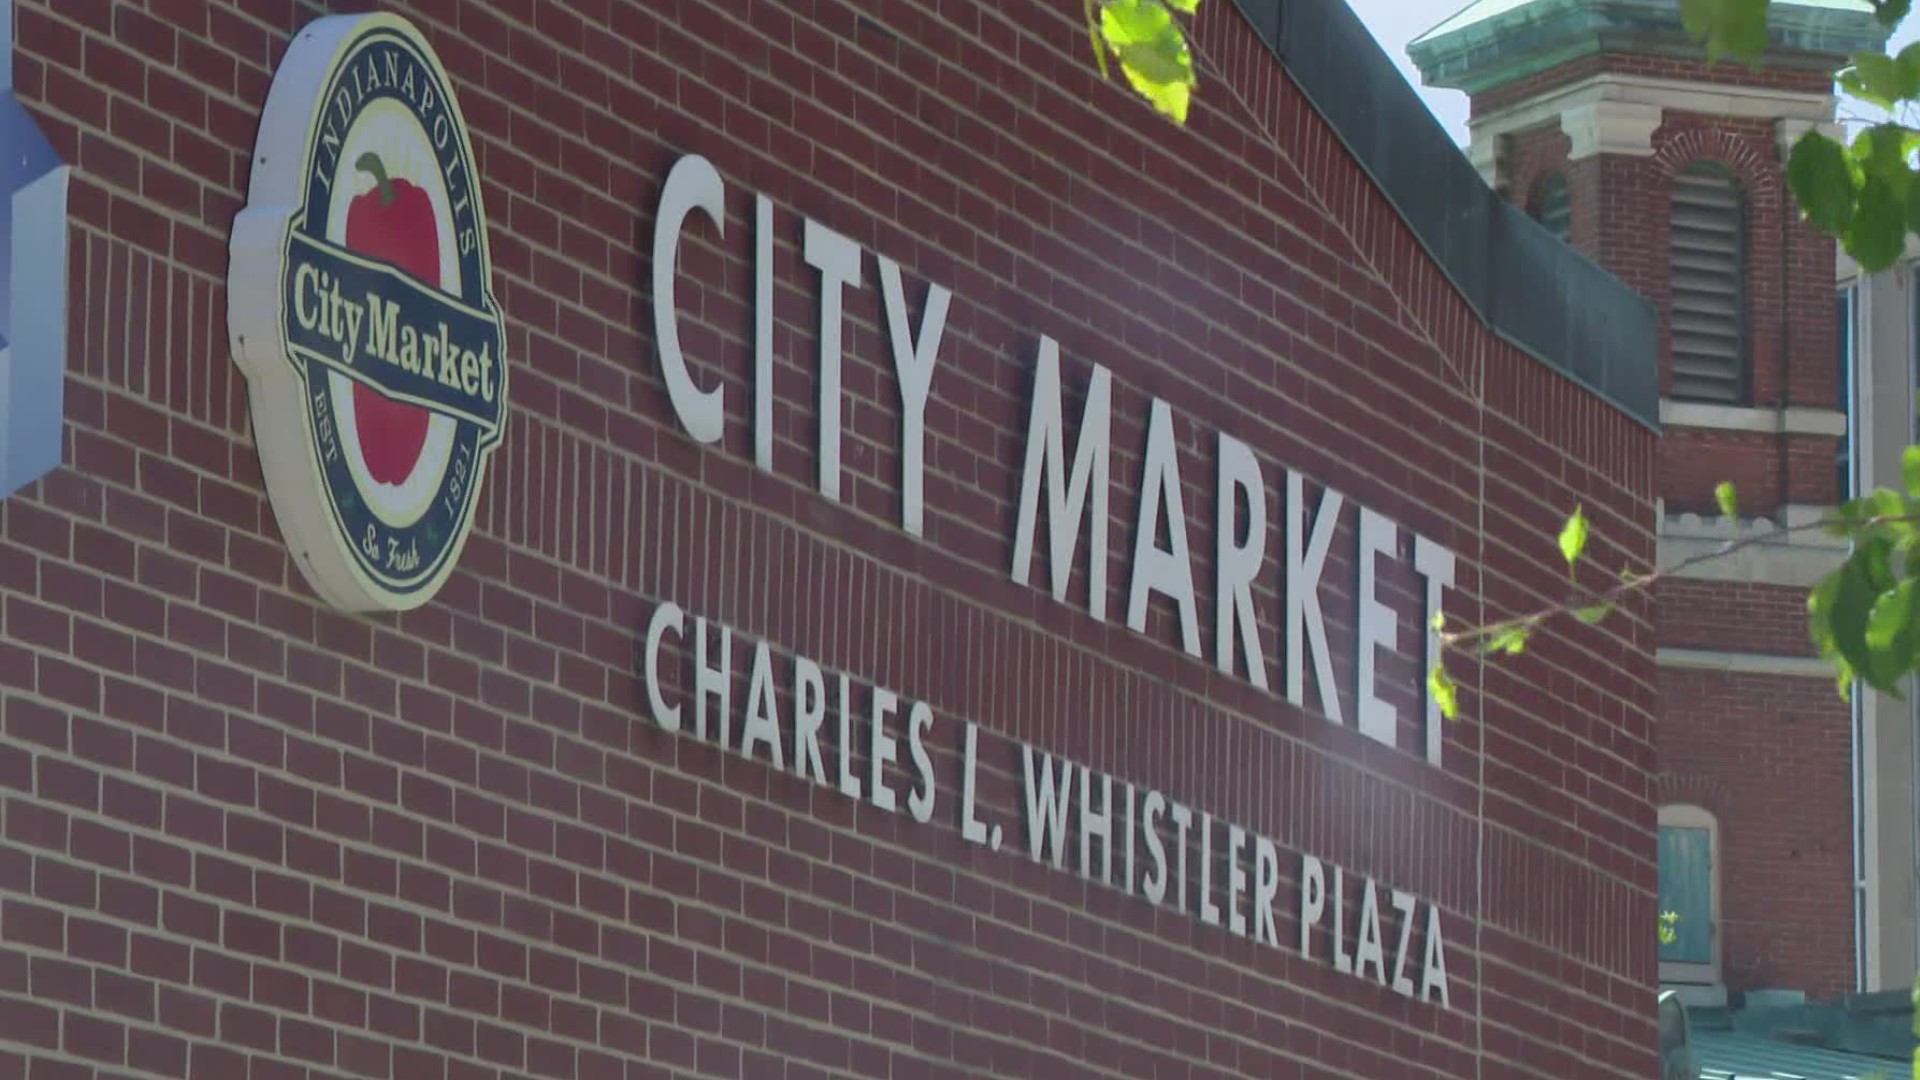 The City Market Board plans to ask the city for more help to keep struggling vendors afloat.